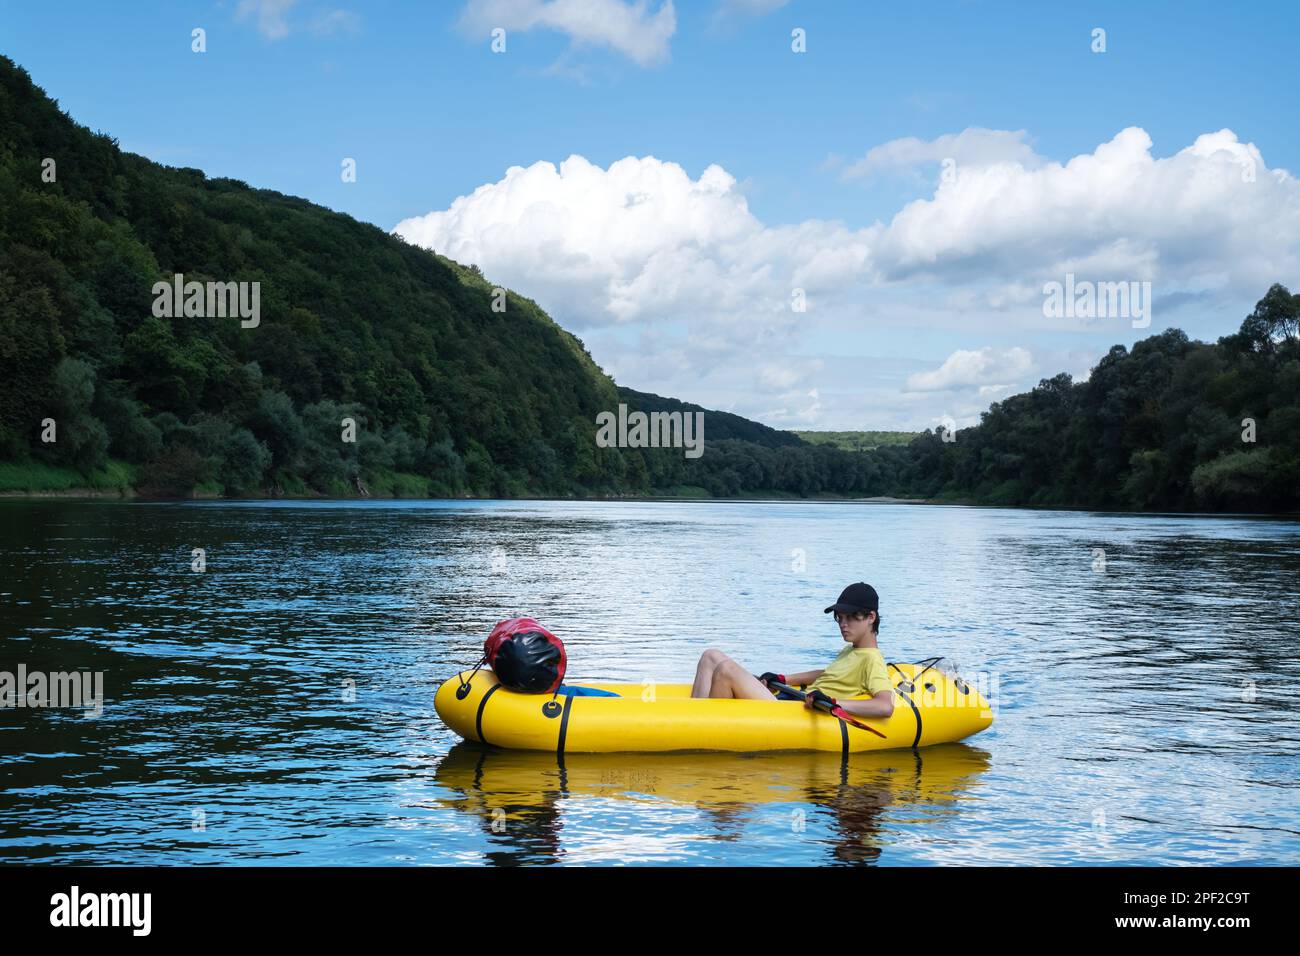 Young boy on yellow packraft boat with red padle on a sunrise river. Packrafting background. Active lifestile concept Stock Photo